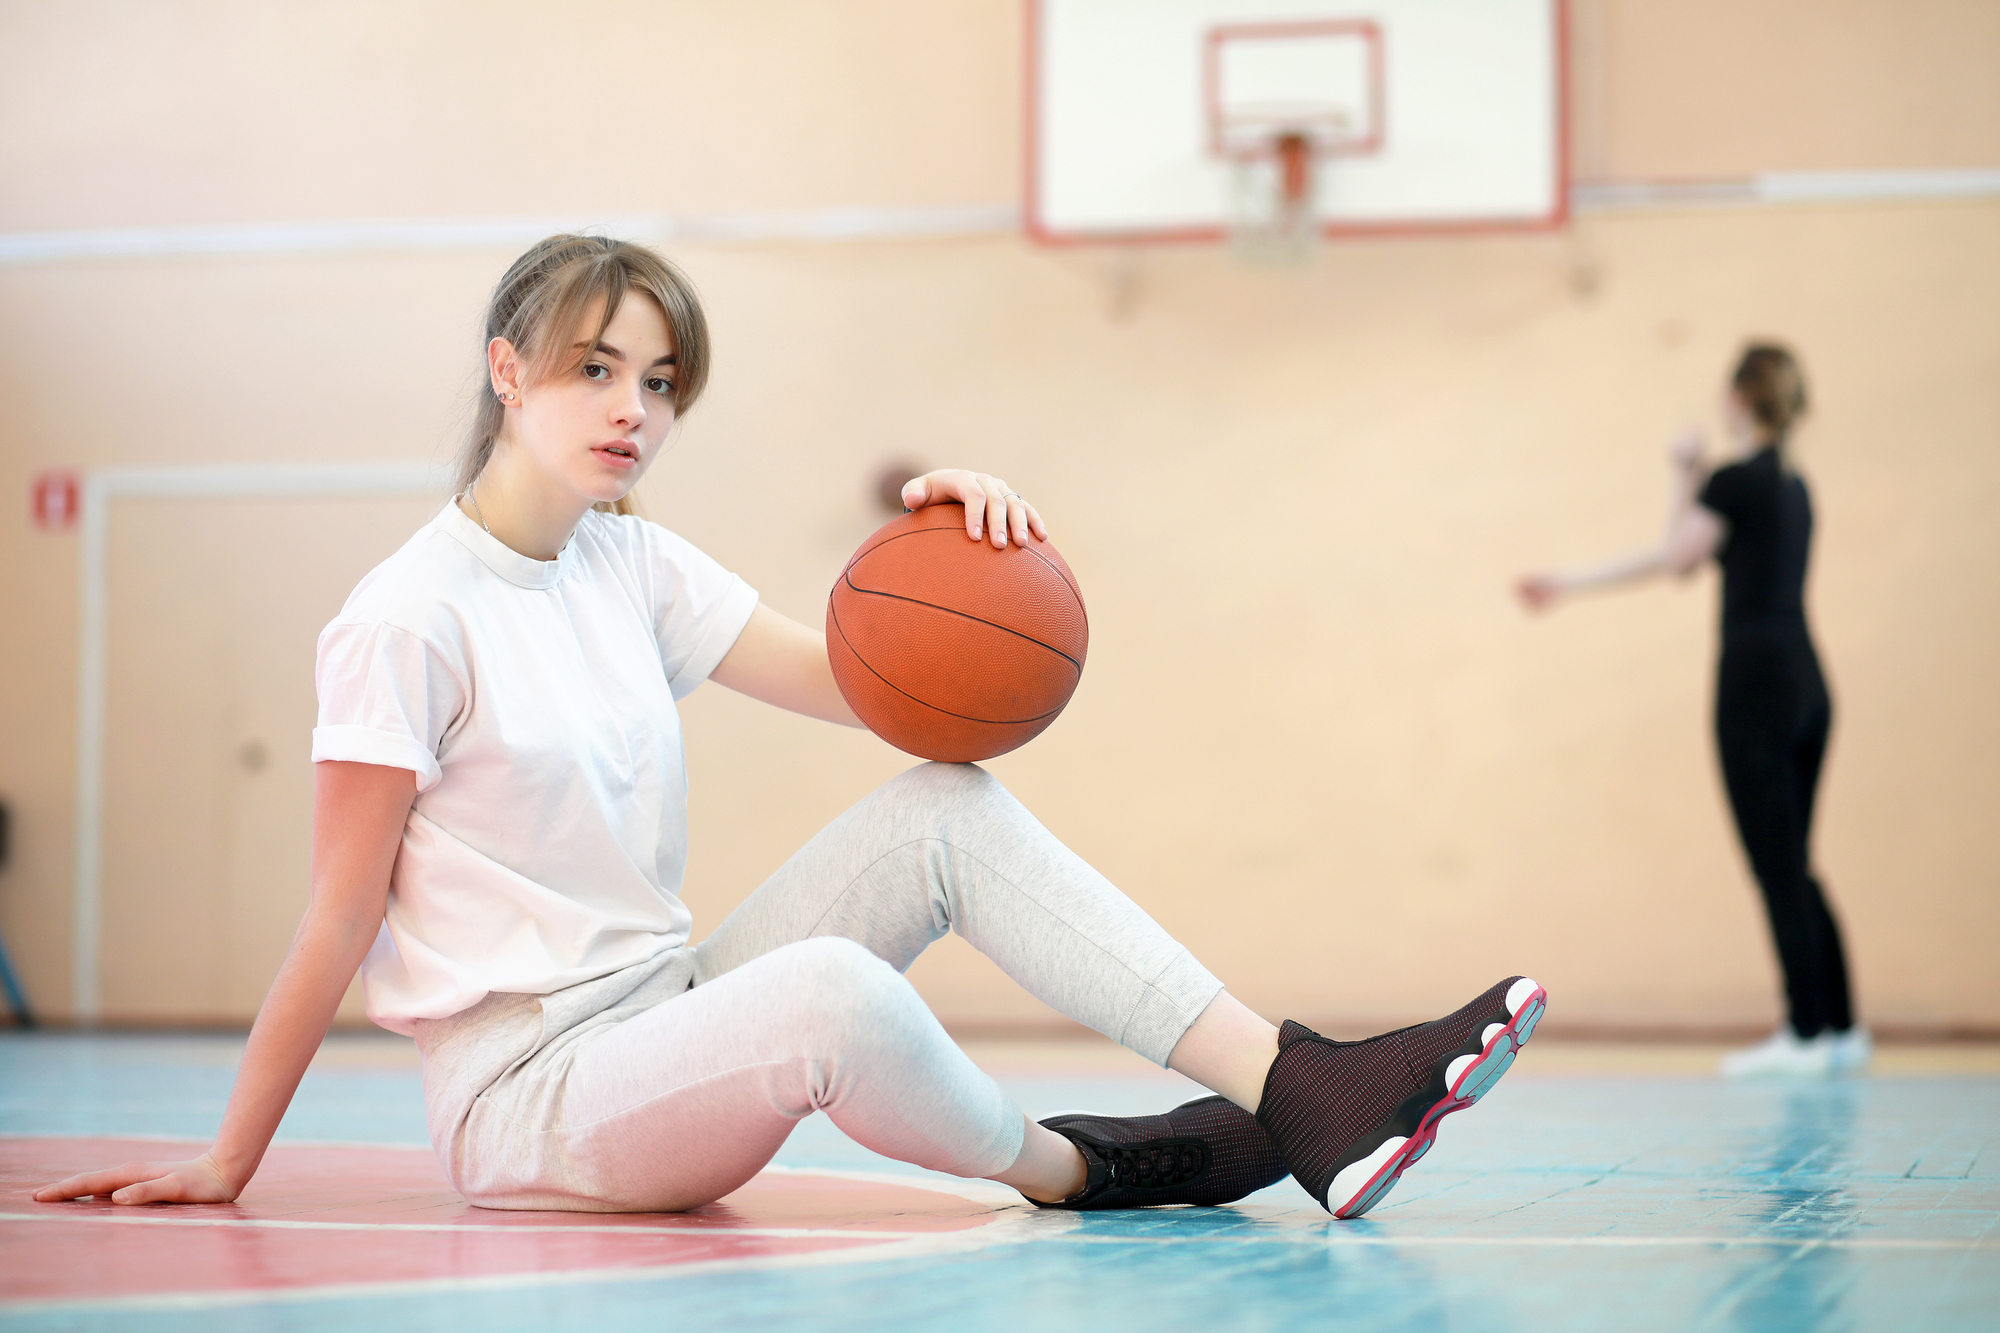 Teen basketball player with a healthy smile.